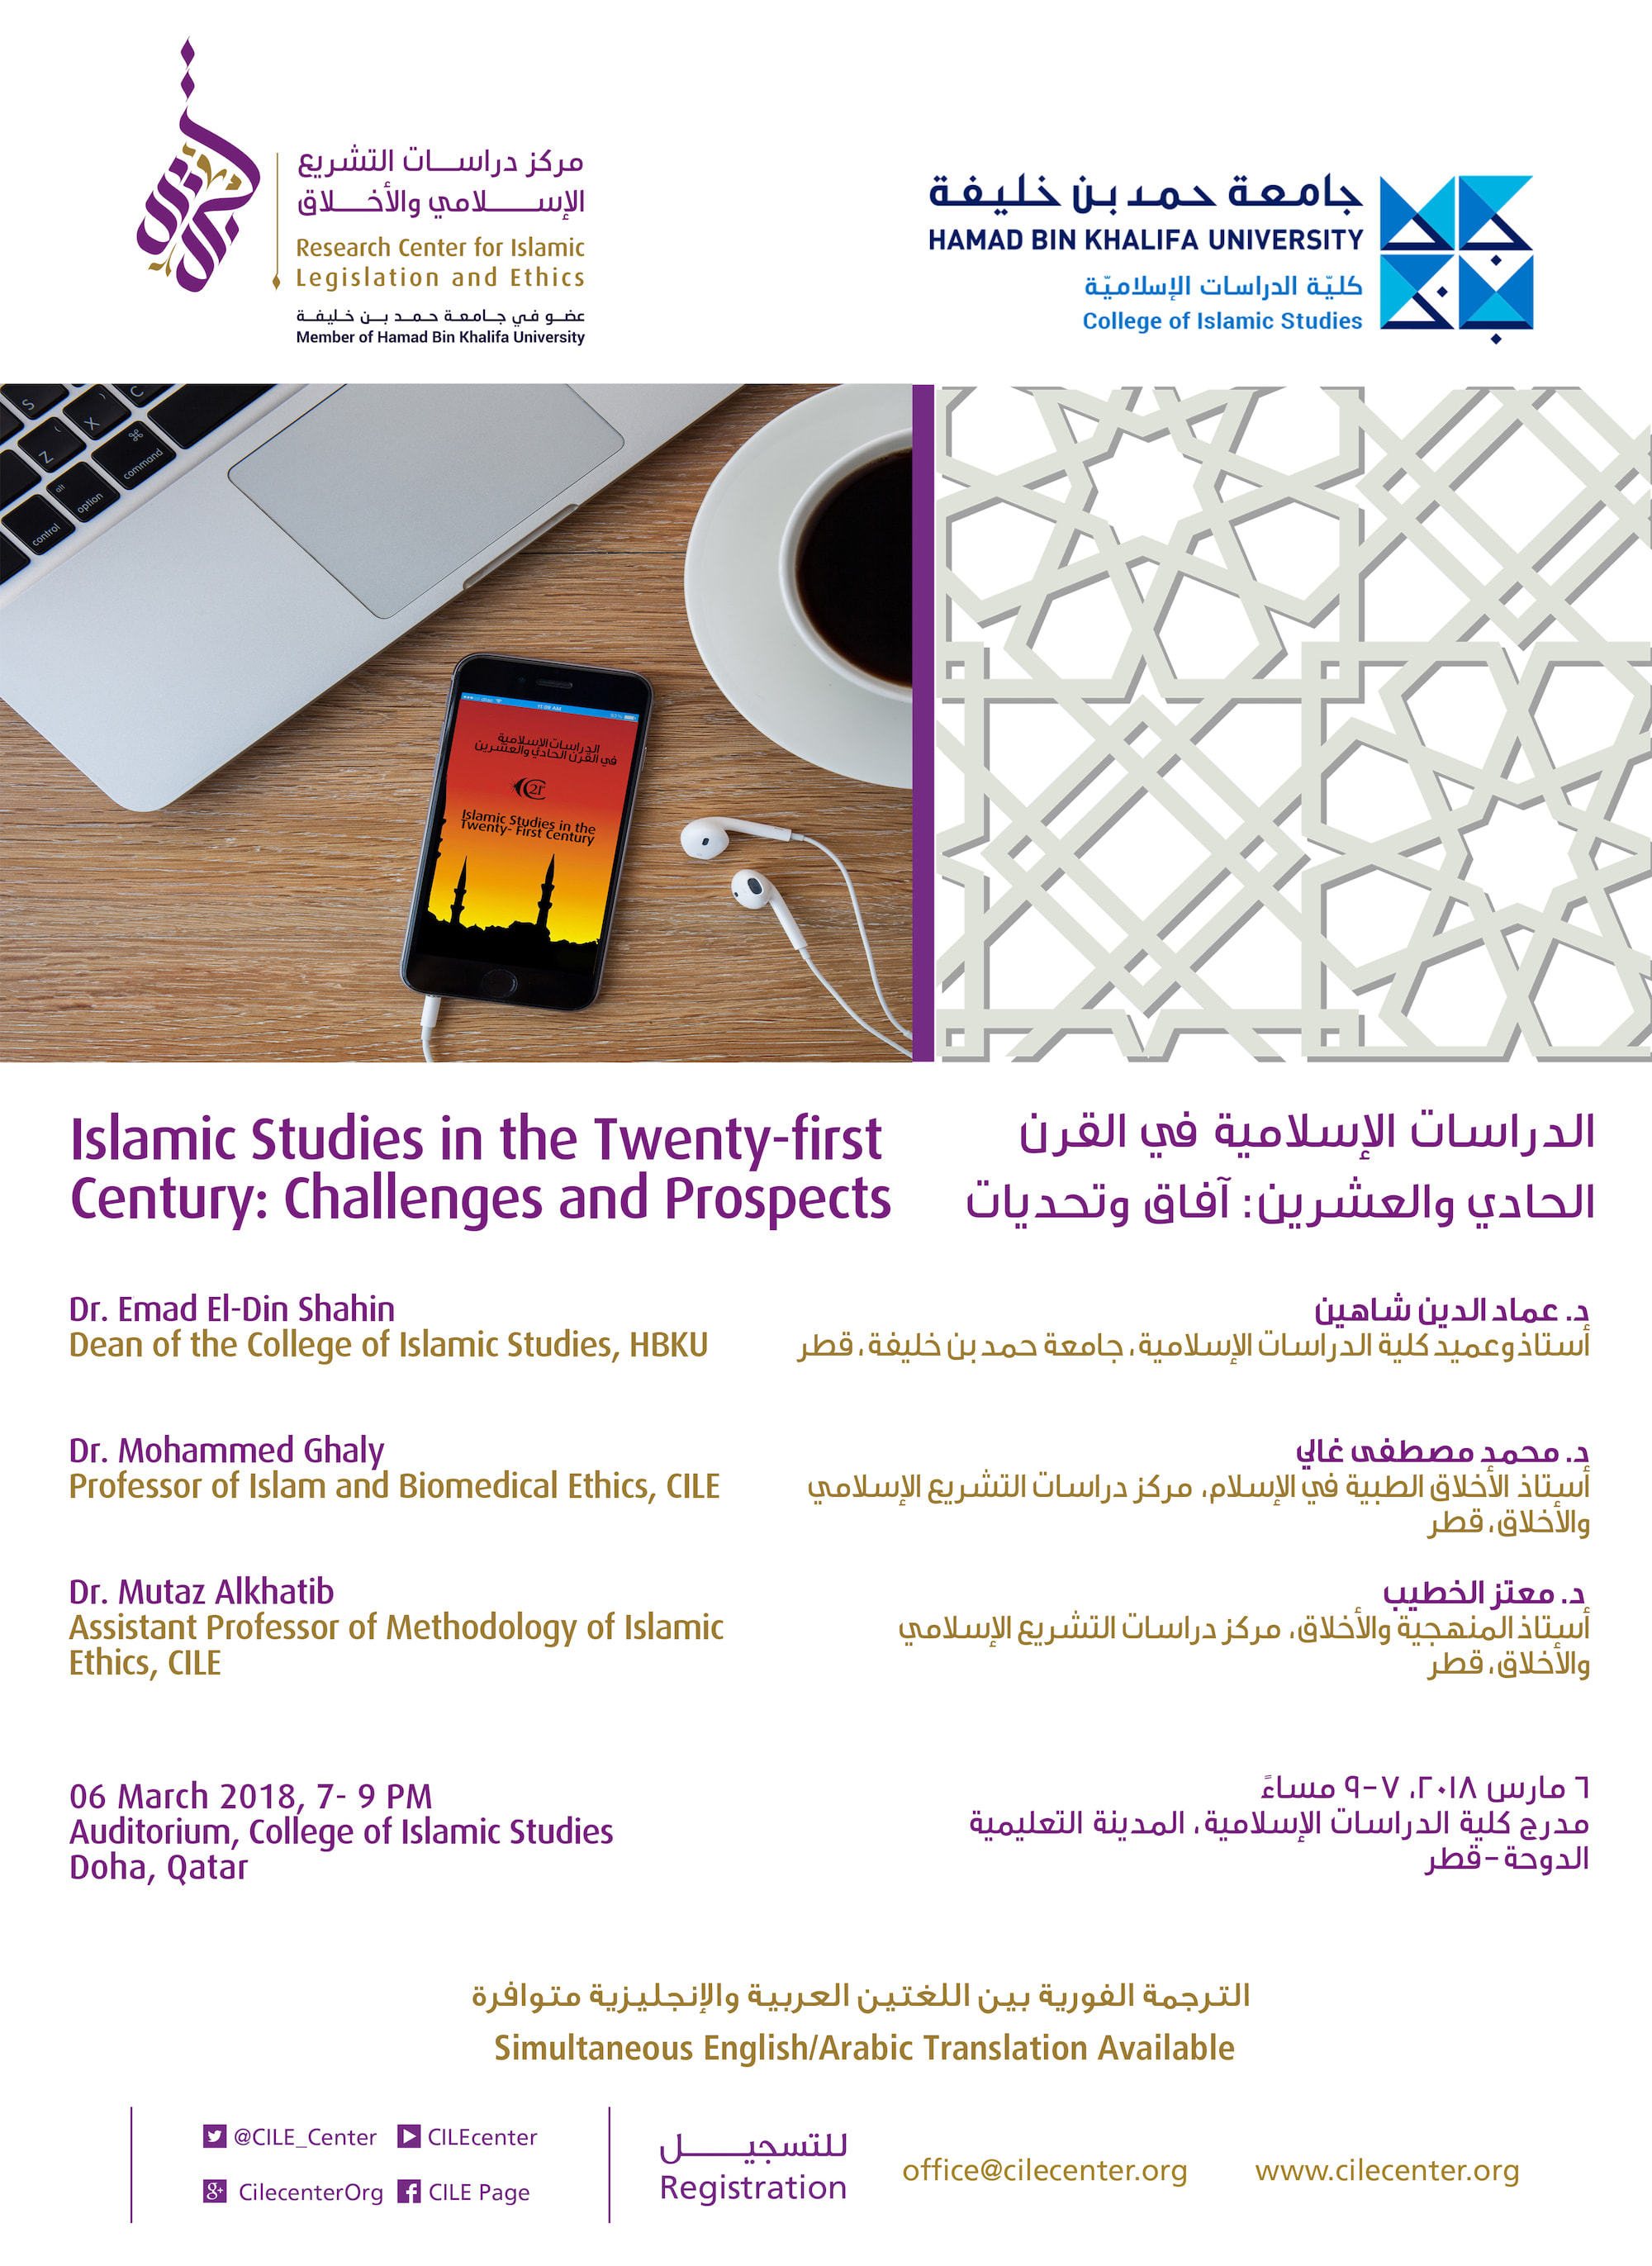 03/2018 Islamic Studies in the Twenty-first Century: Challenges and Prospects